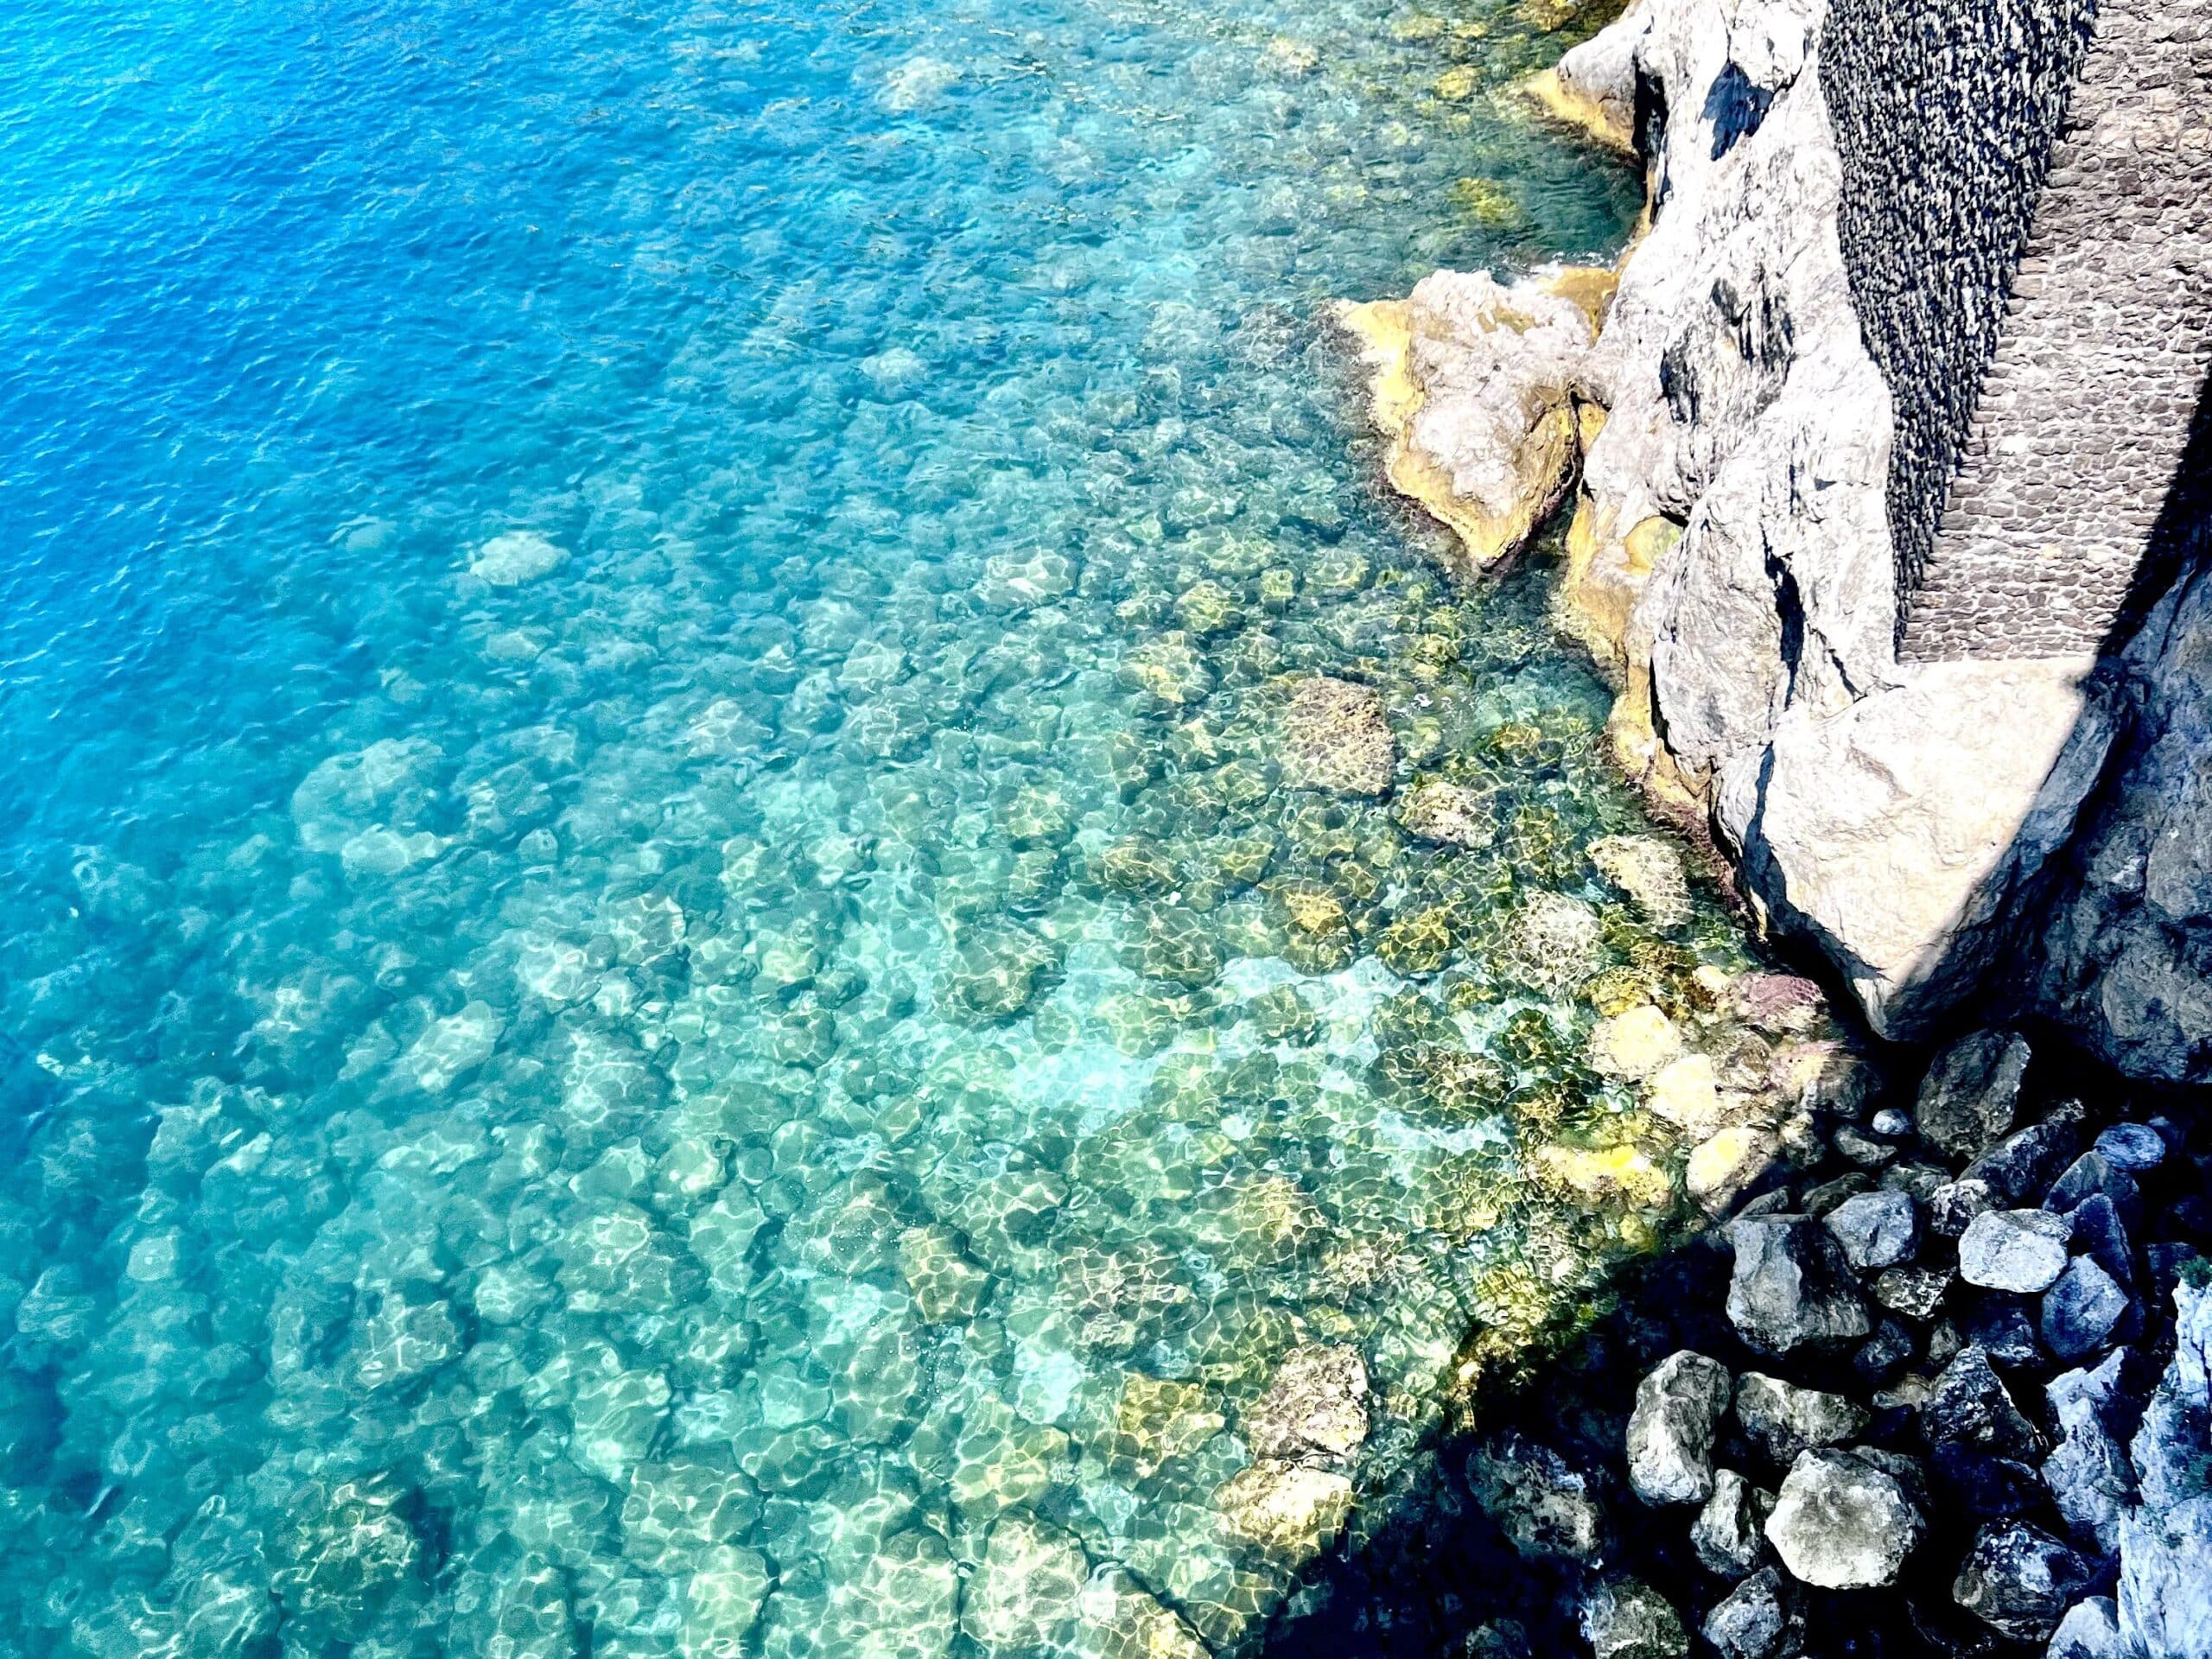 View of the crystal clear blue waters of Amalfi